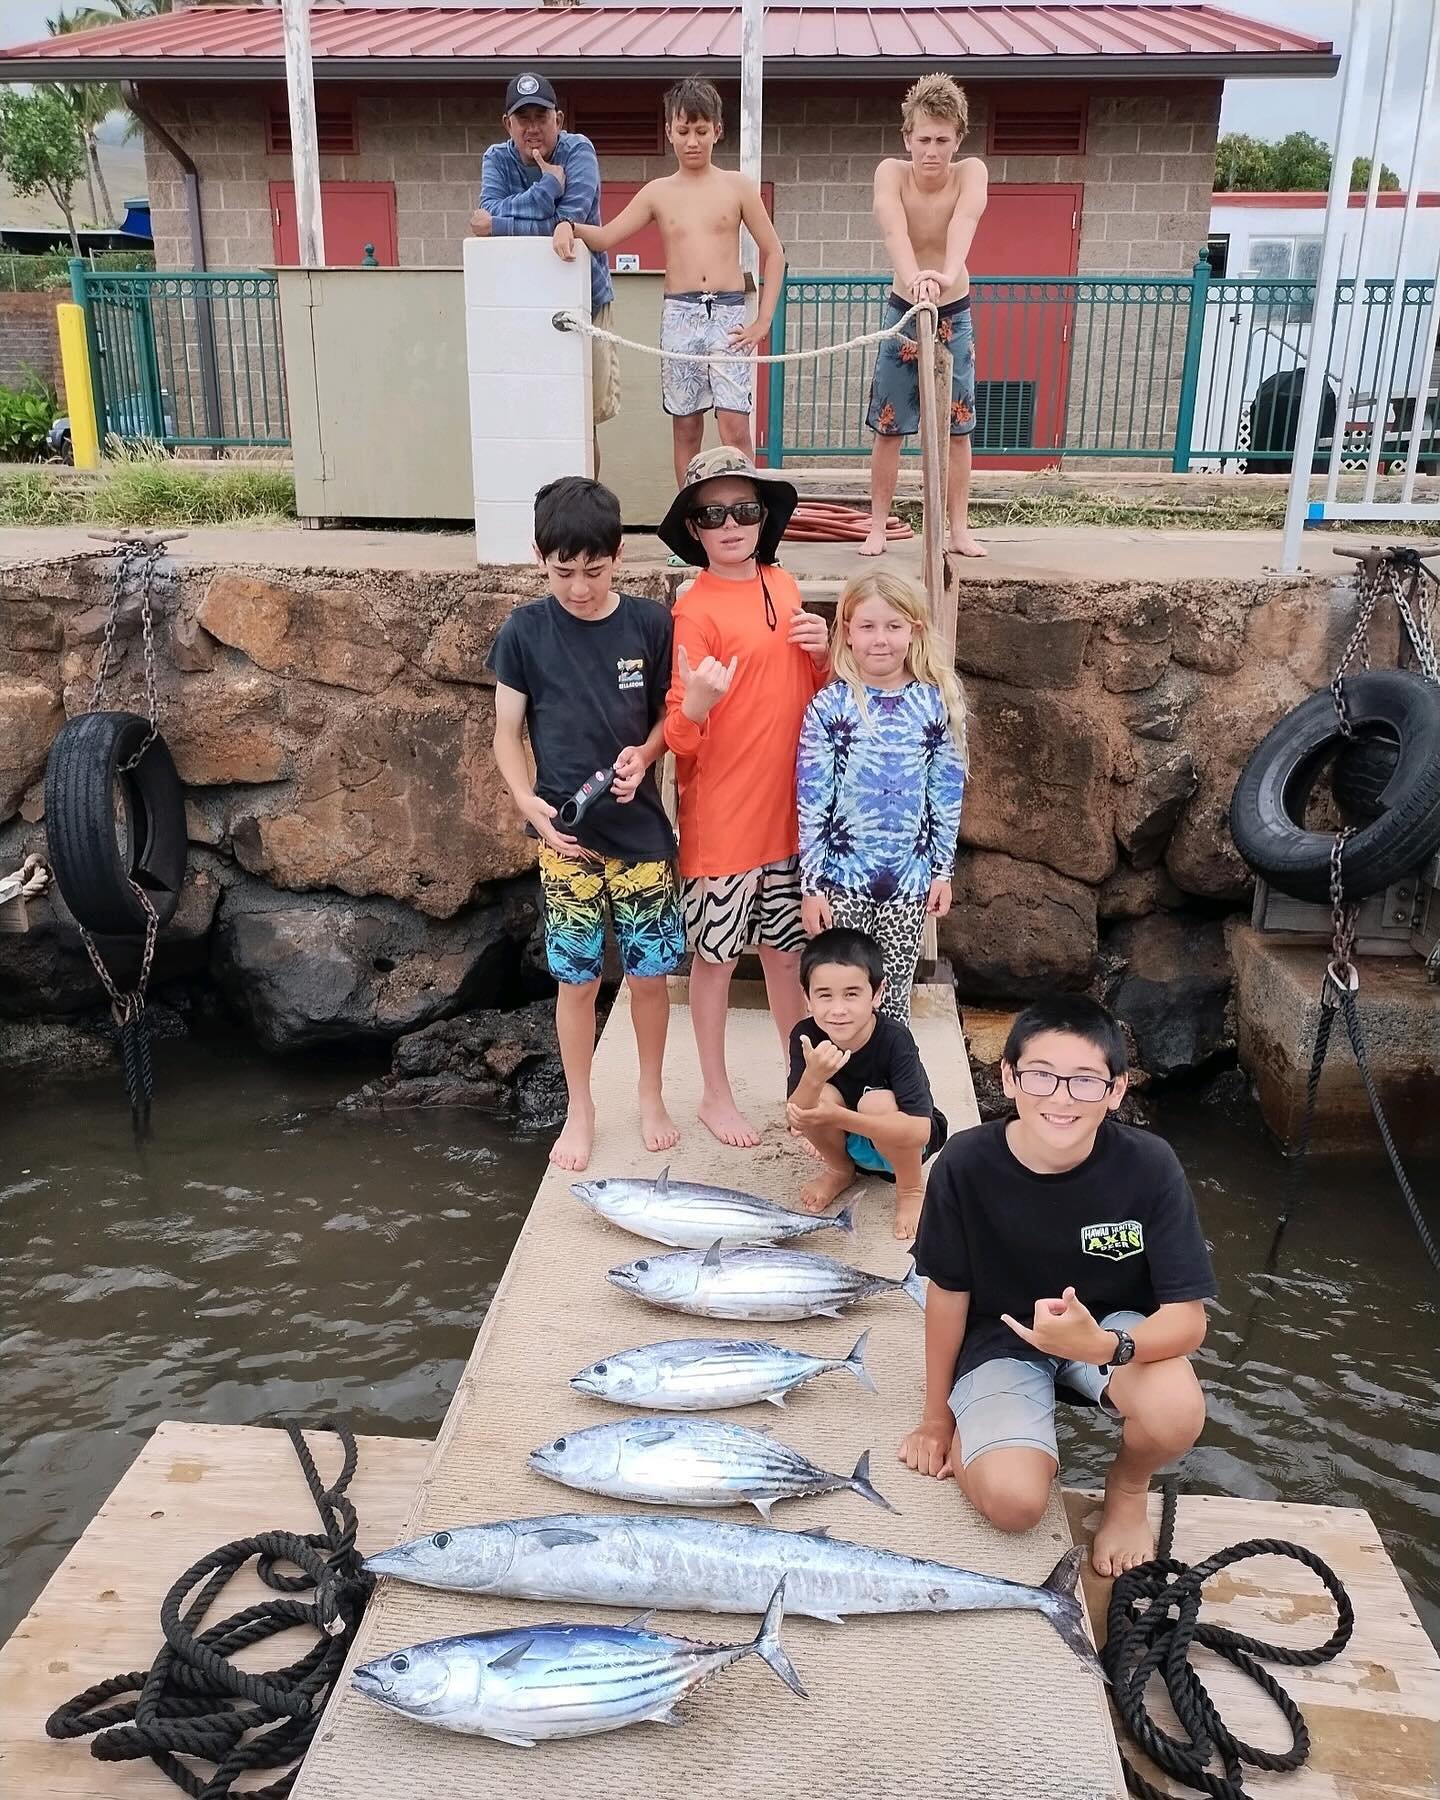 Solid start to the weekend! 🎣🙌🏽💯
Our sister company @maui_fun_charters is available for private and shared charters during weekdays and on weekends by special request.
Shared charters are bottom fishing trips
Private charters are your choice! And